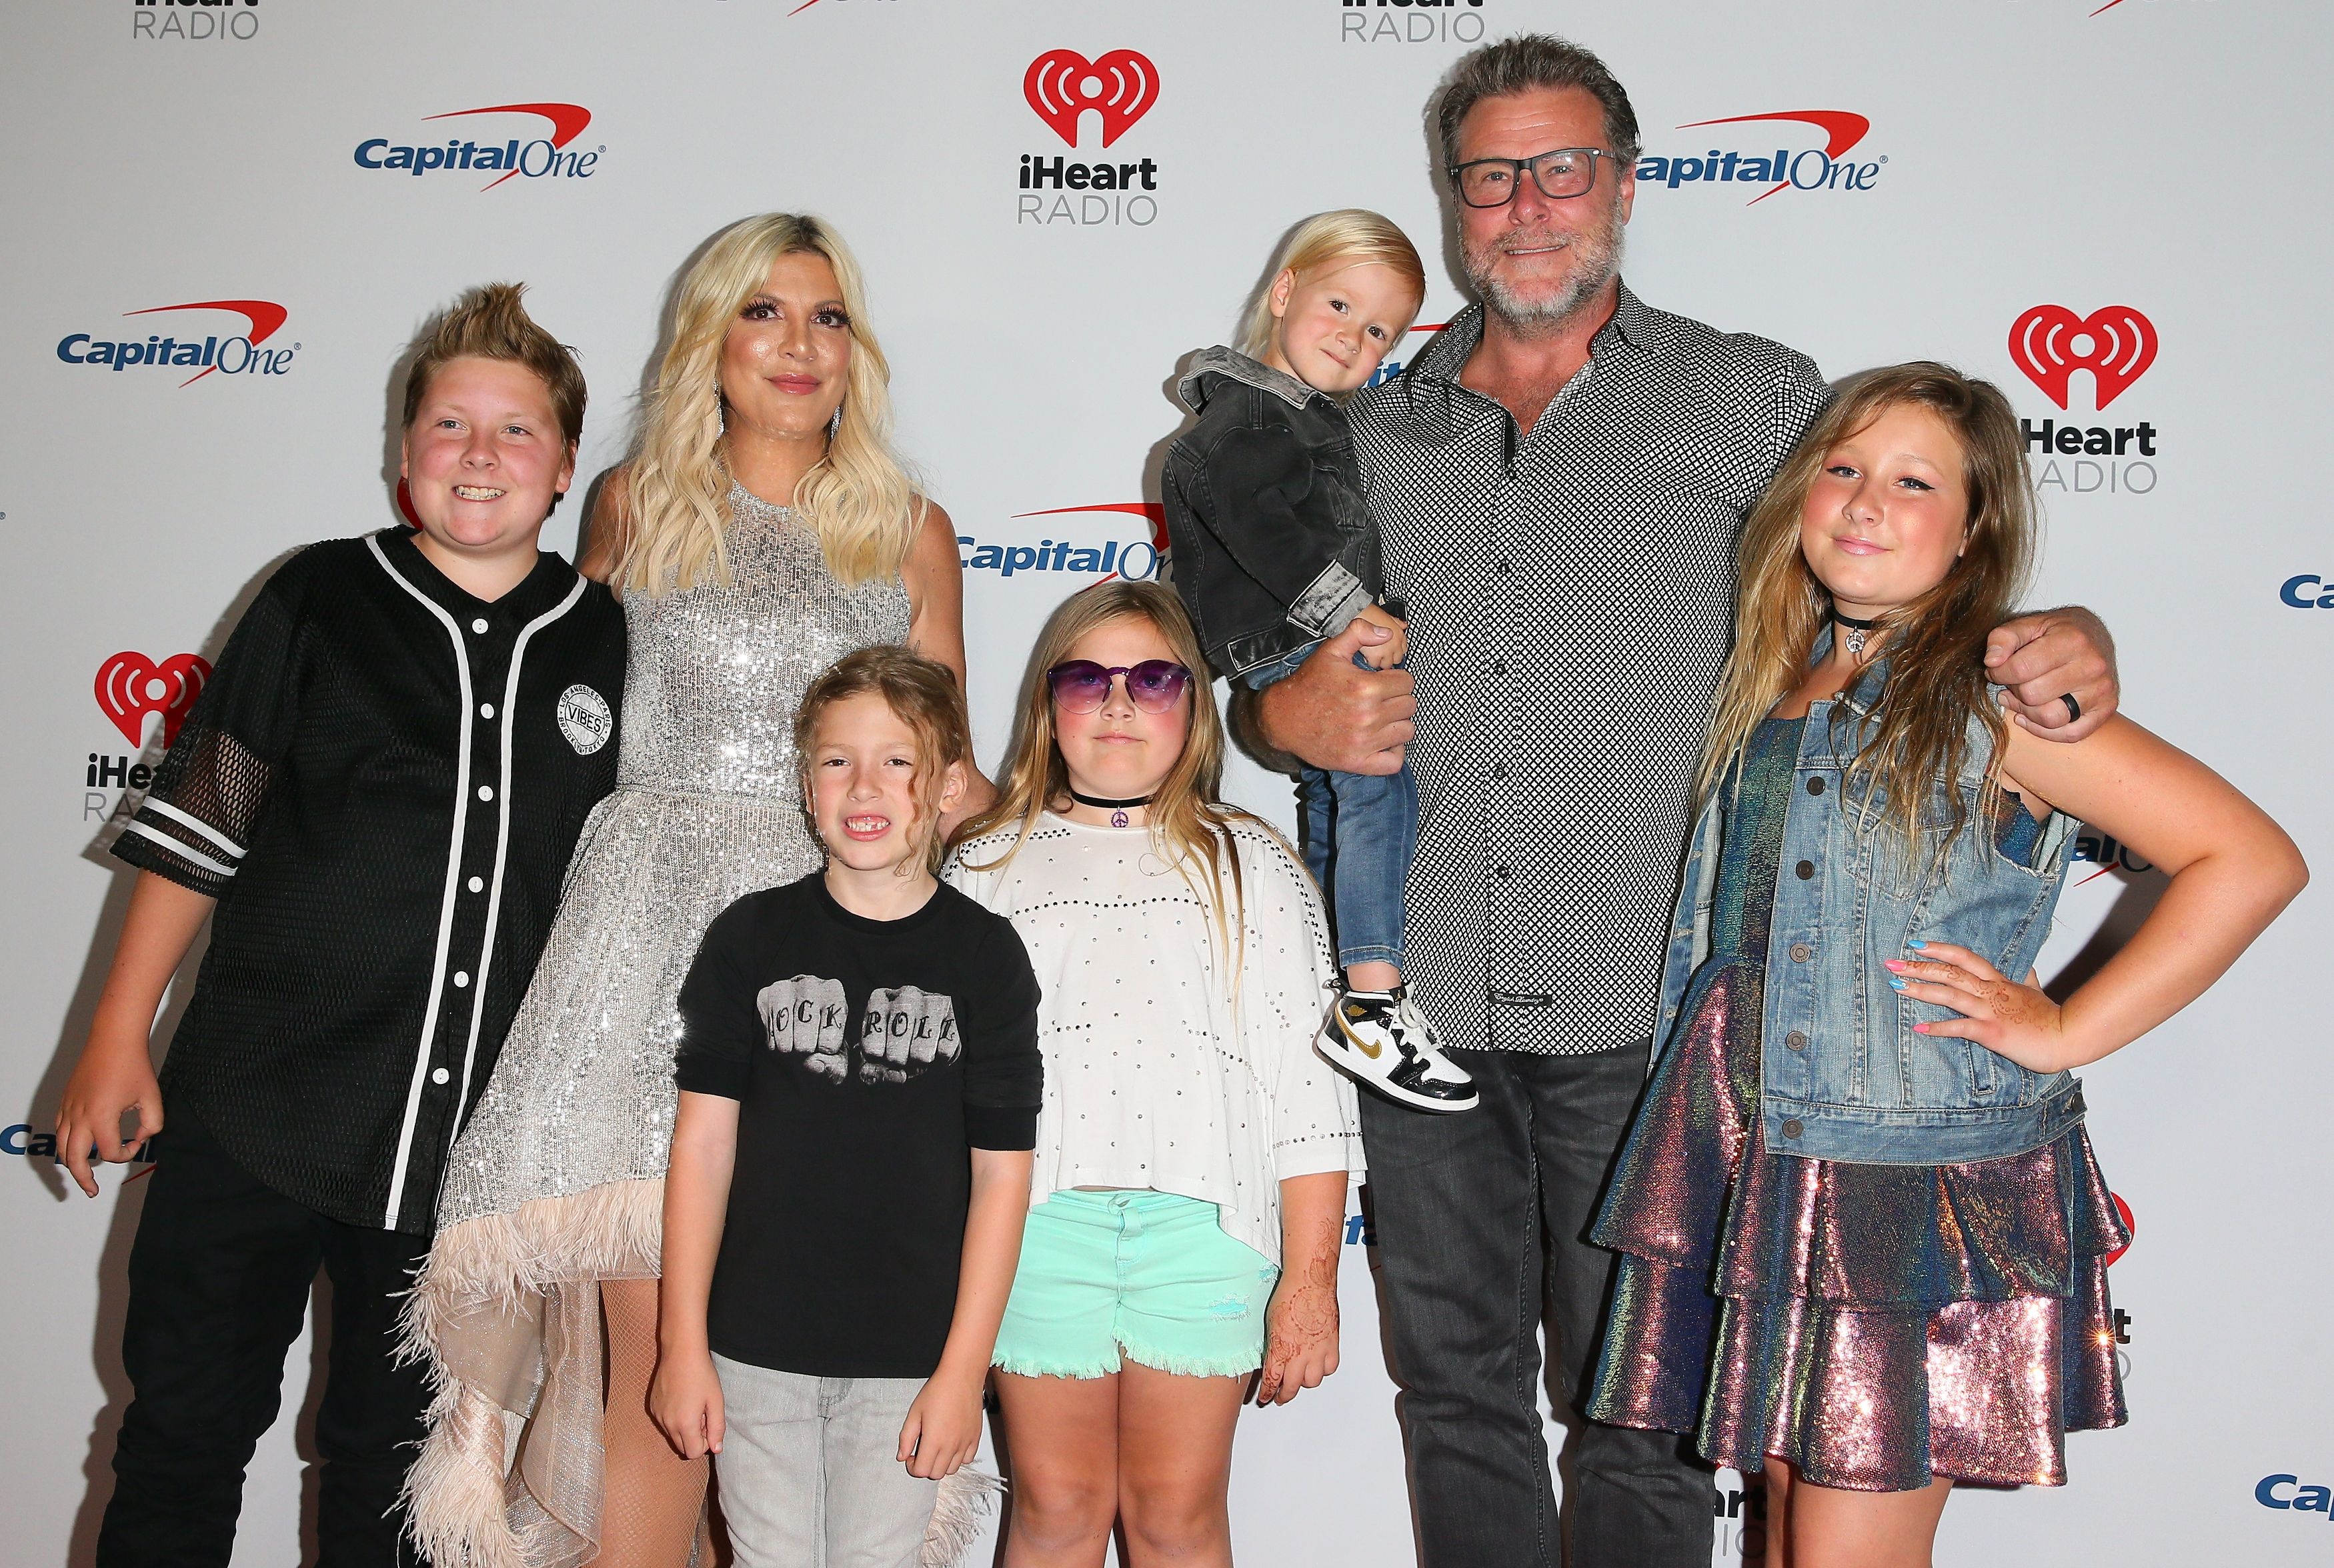 Tori Spelling, and her family, Dean, Stella Doreen, Hattie Margaret, Liam Aaron, Finn Davey, and Beau Dean McDermott during the 2019 iHeartRadio Music Festival at T-Mobile Arena on September 20, 2019, in Las Vegas, Nevada | Source: Getty Images